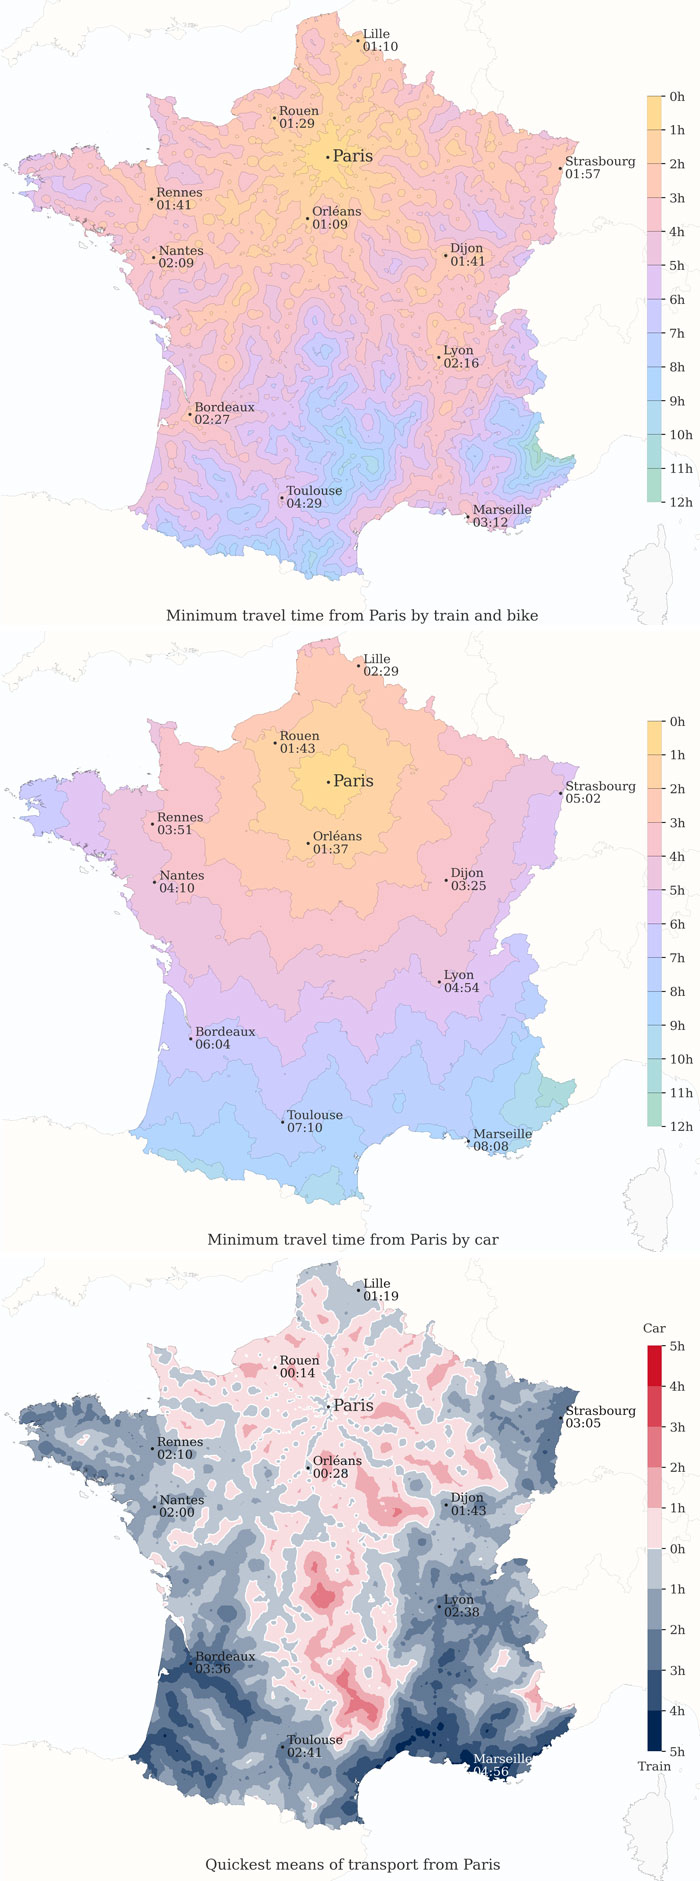 Minimum Travel Time From Paris By Train & Bike And Comparison To Car